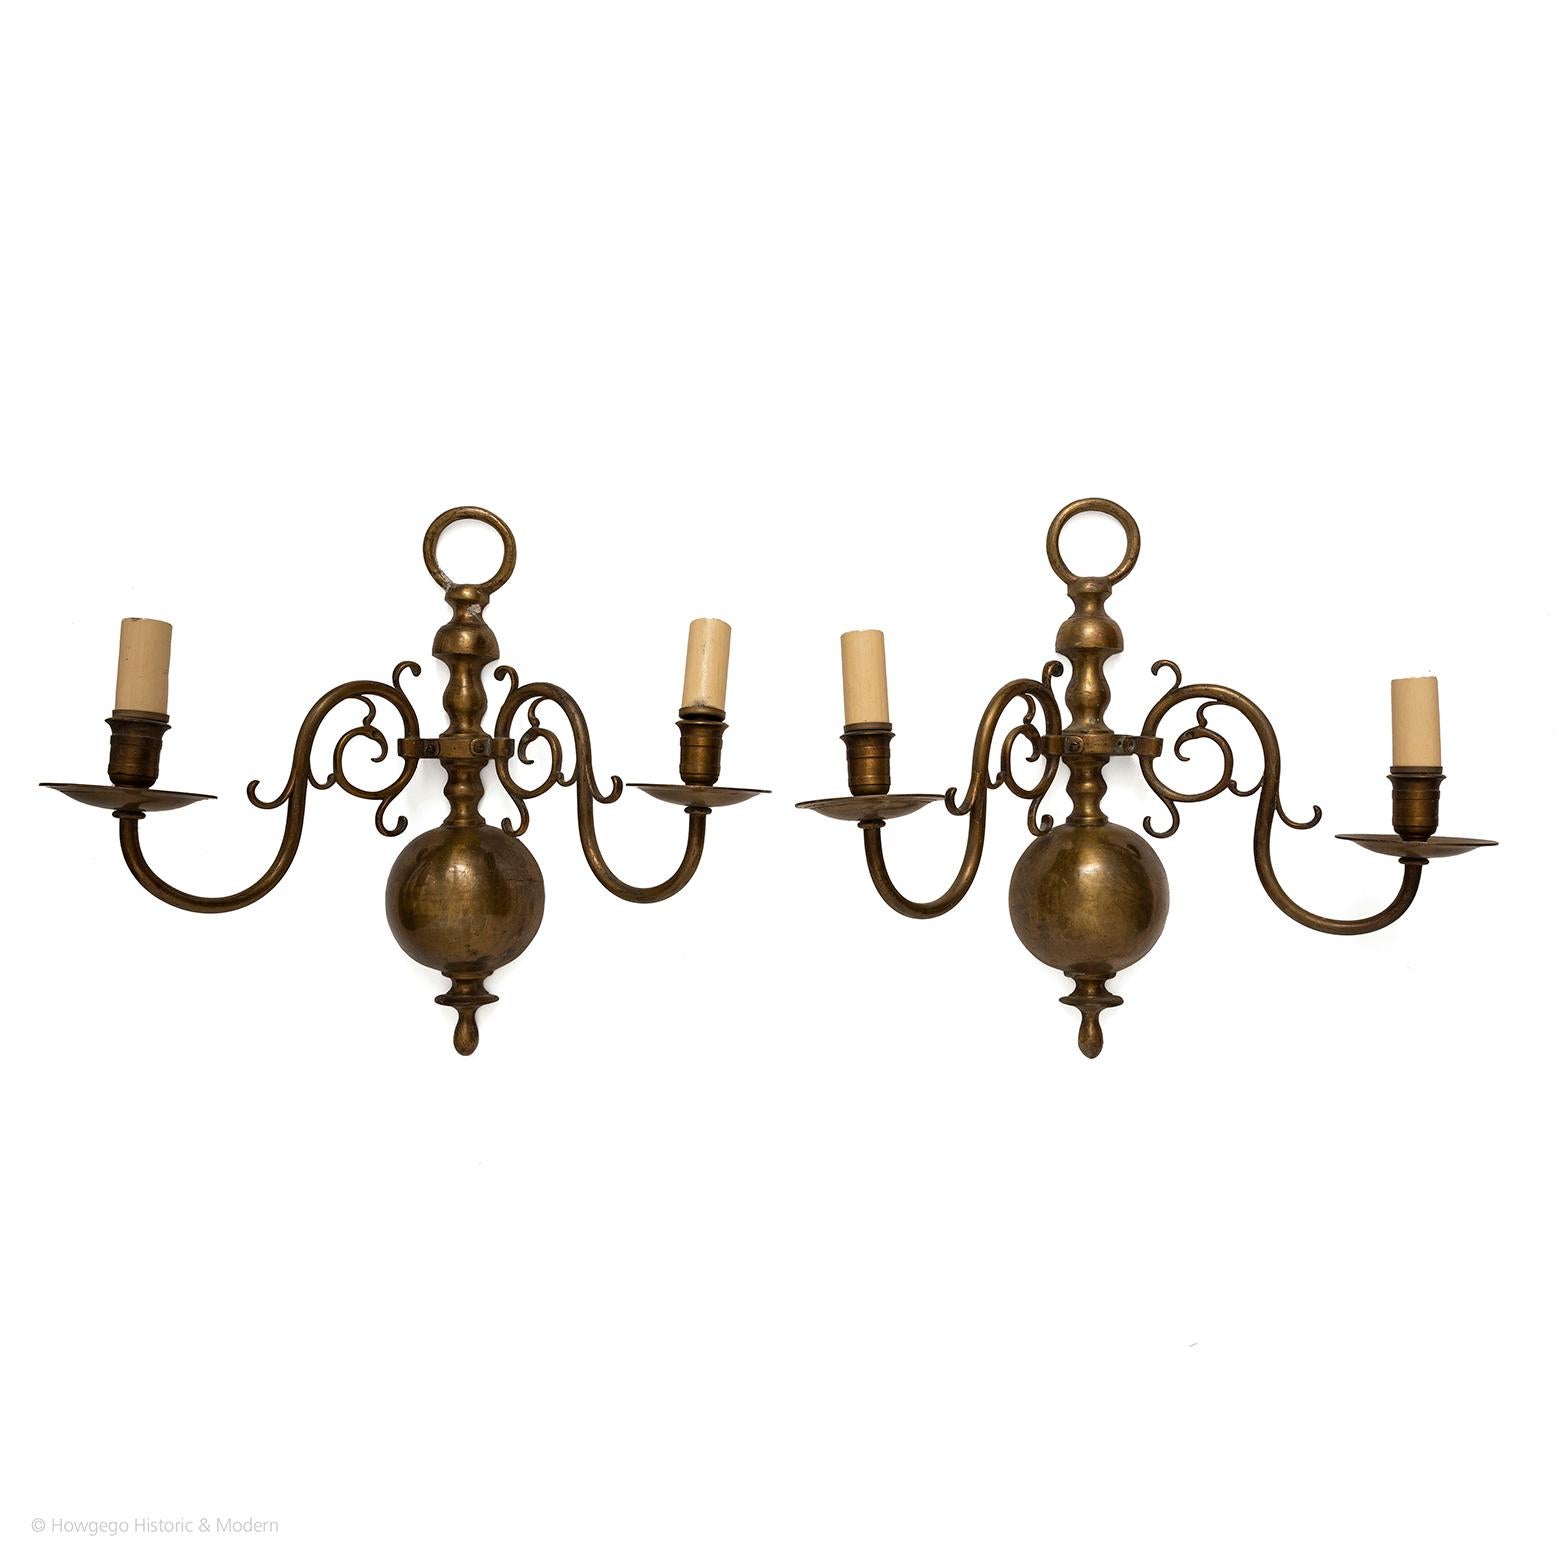 Characterful pair of sconces injecting atmosphere into the interior
Stylish classic form with characteristic Dutch split turned backs and large scrolling arms
Electrified

Measures: Length 39cm., 15